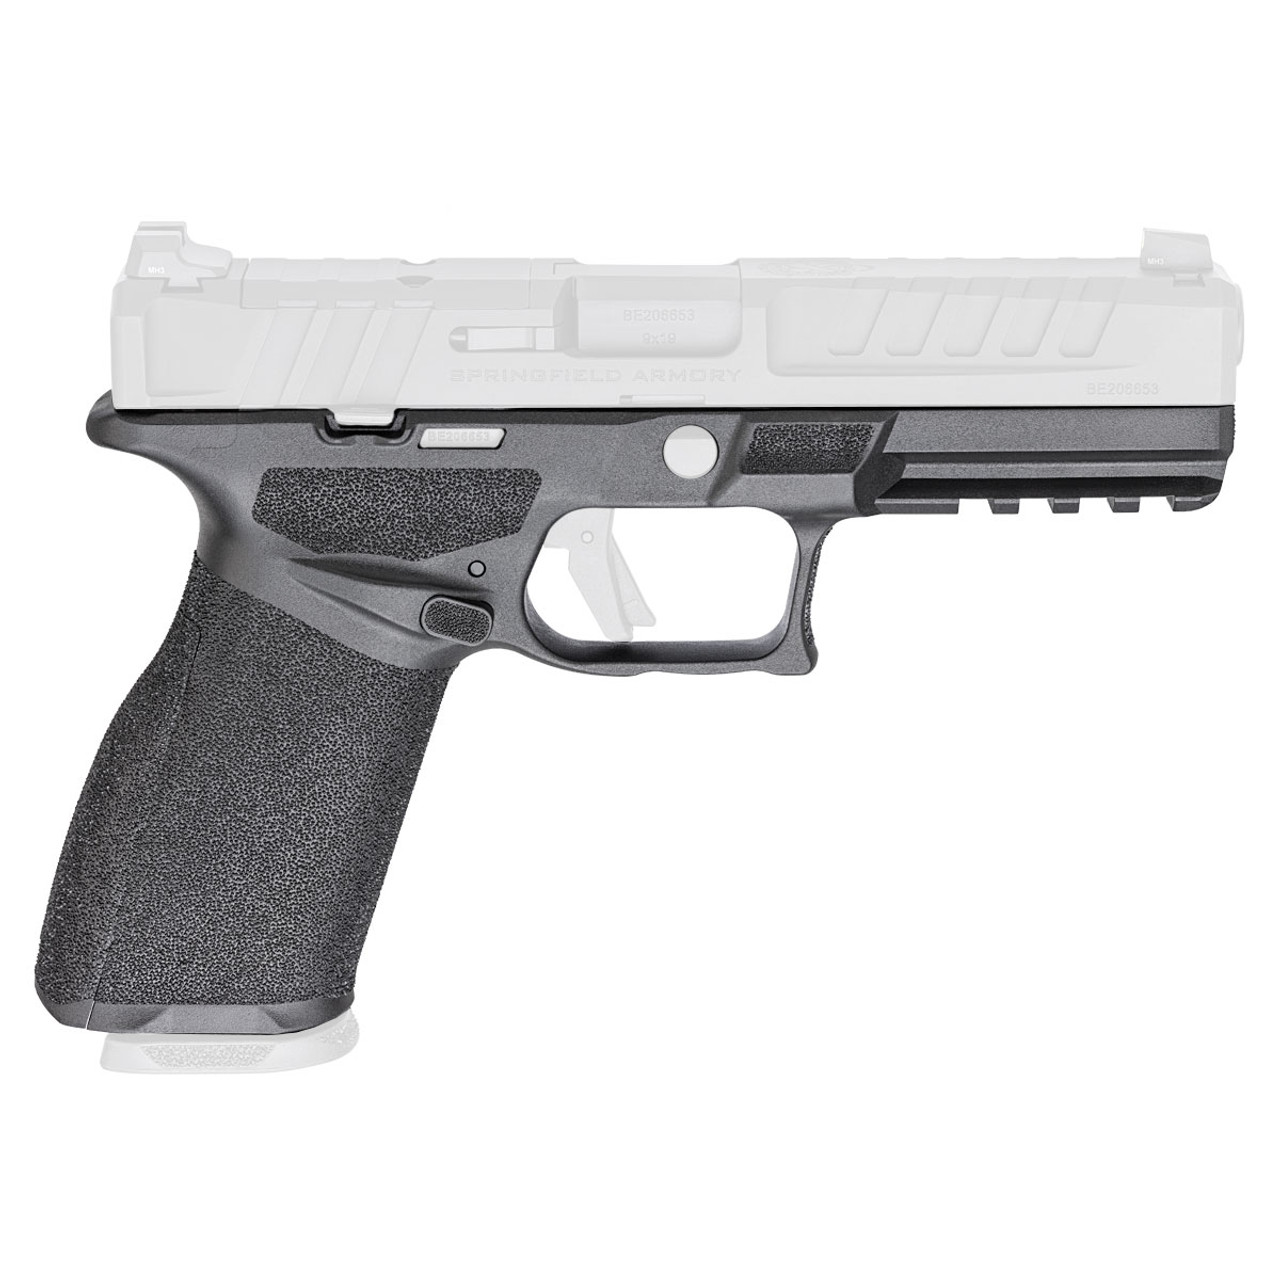 Springfield Armory EC1001HTRET Echelon Grip Module Small, Aggressive Texture, Black Polymer, Ambi Mag Release, Includes 3 Interchangeable Backstraps